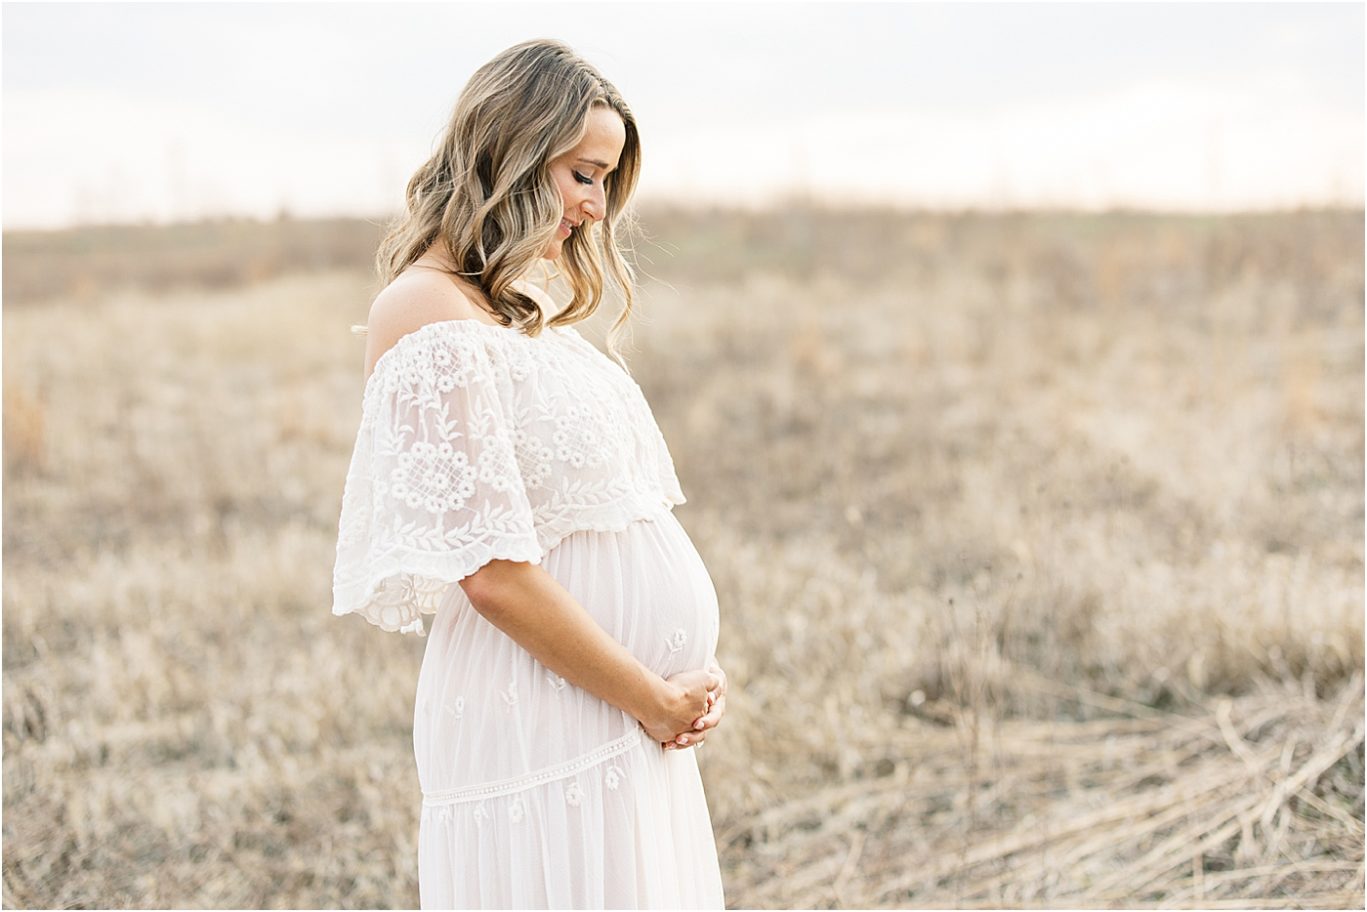 Pregnancy photoshoot to celebrate first baby. Photo by Lindsay Konopa Photography.